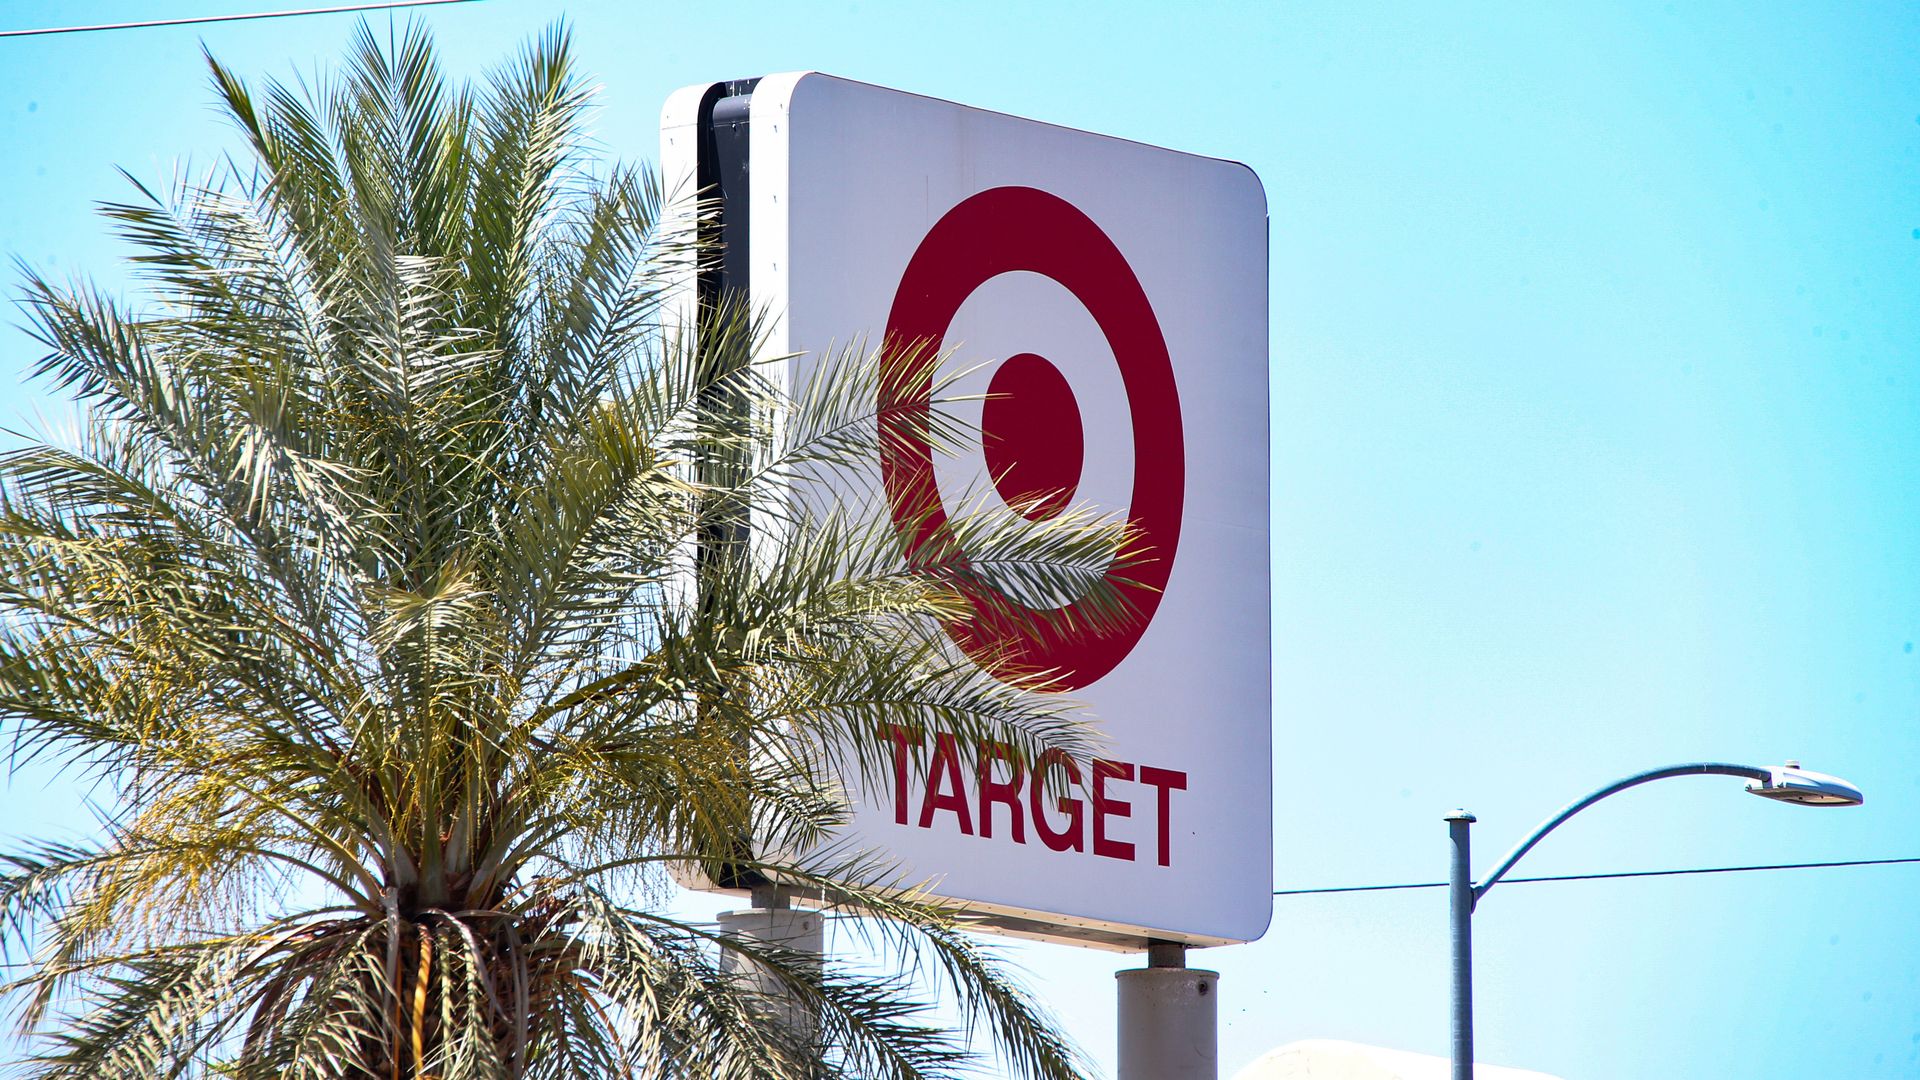 A Target Corporation logo is displayed on a sign near their retail store with palm trees